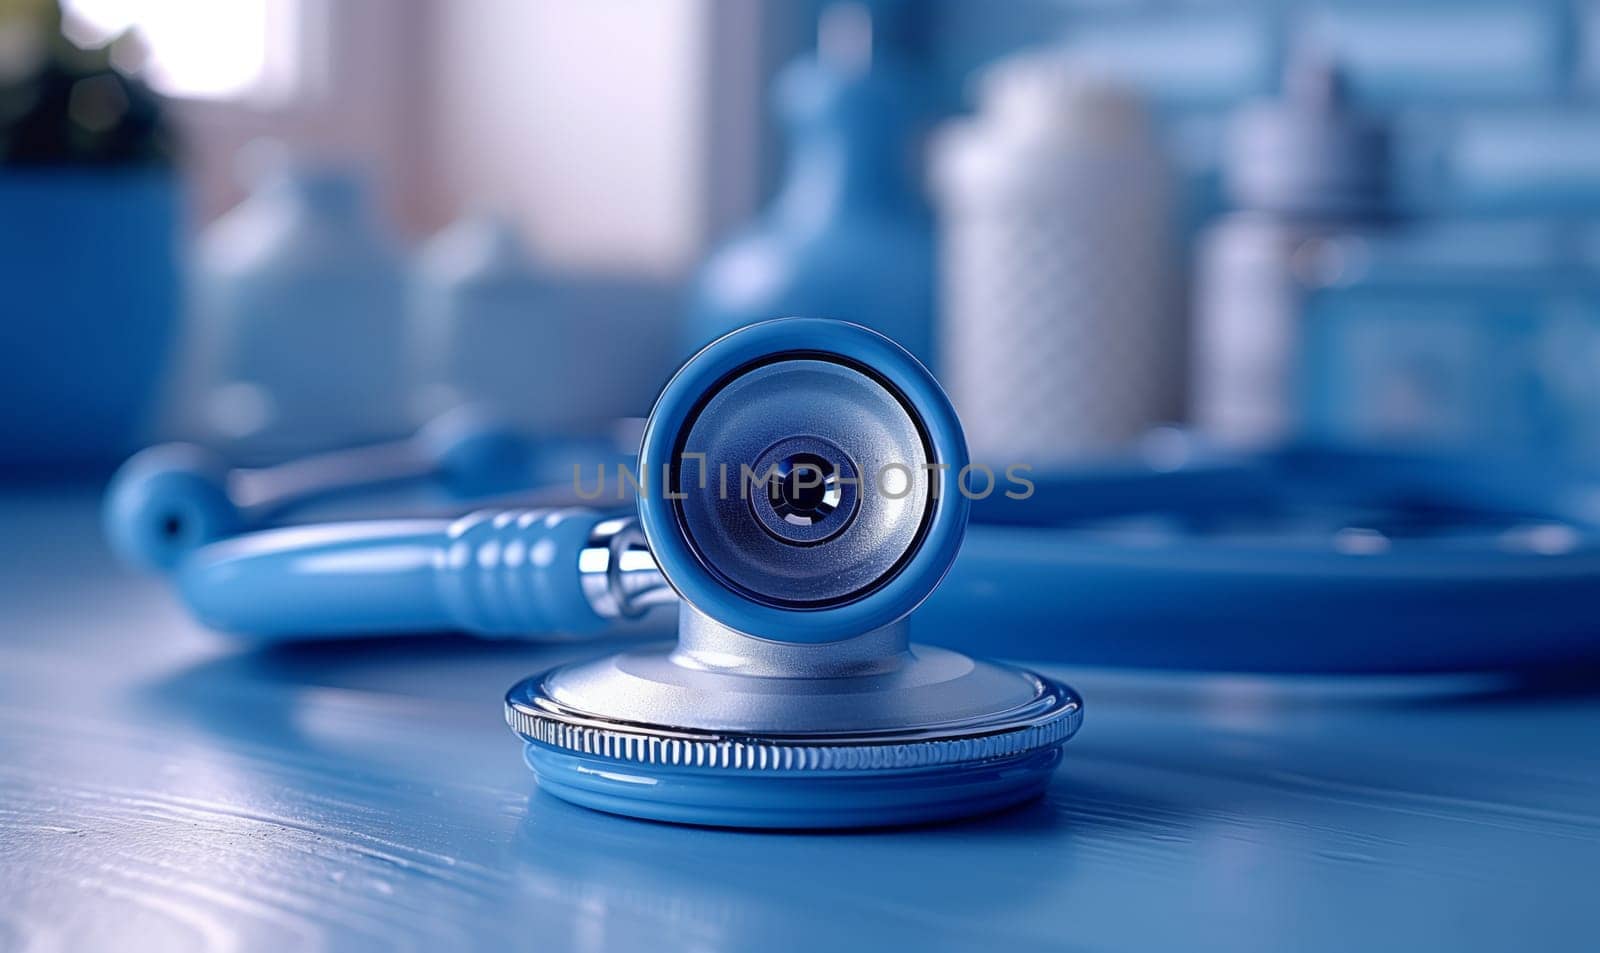 A gas blue stethoscope is placed on an electric blue table, creating a harmonious circle of color. The cameras optics capture the gadget fashion accessory in a macro photography style